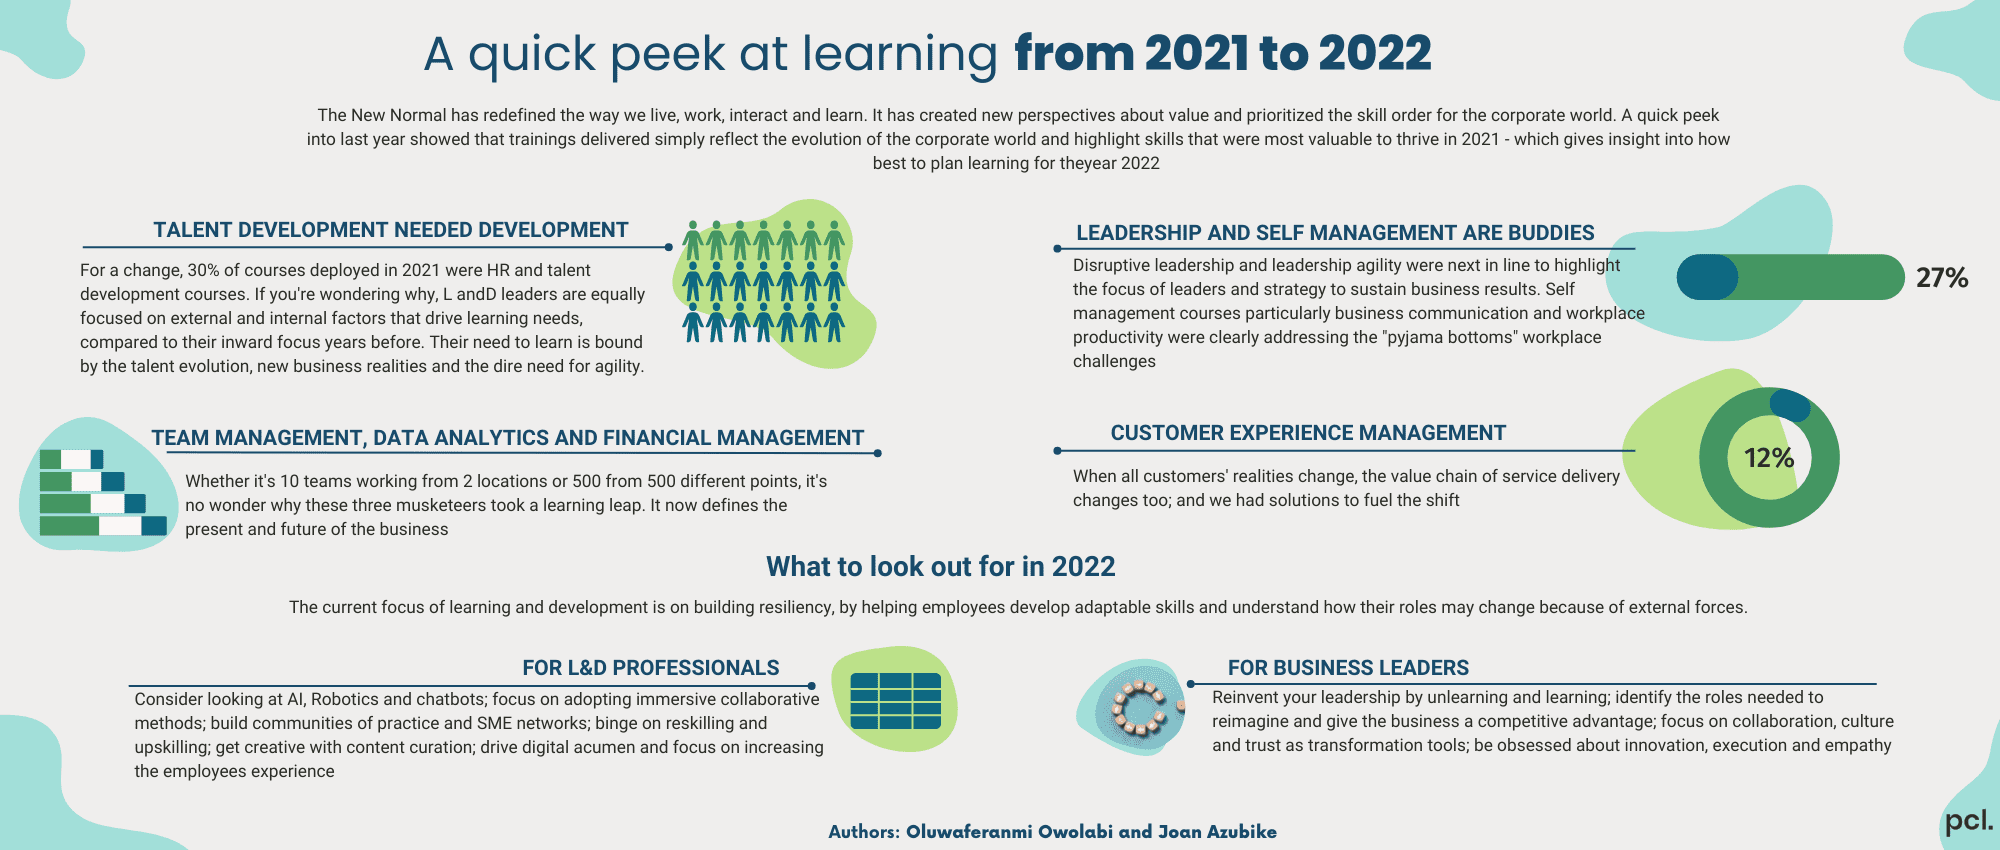 A quick peek at learning in 2021